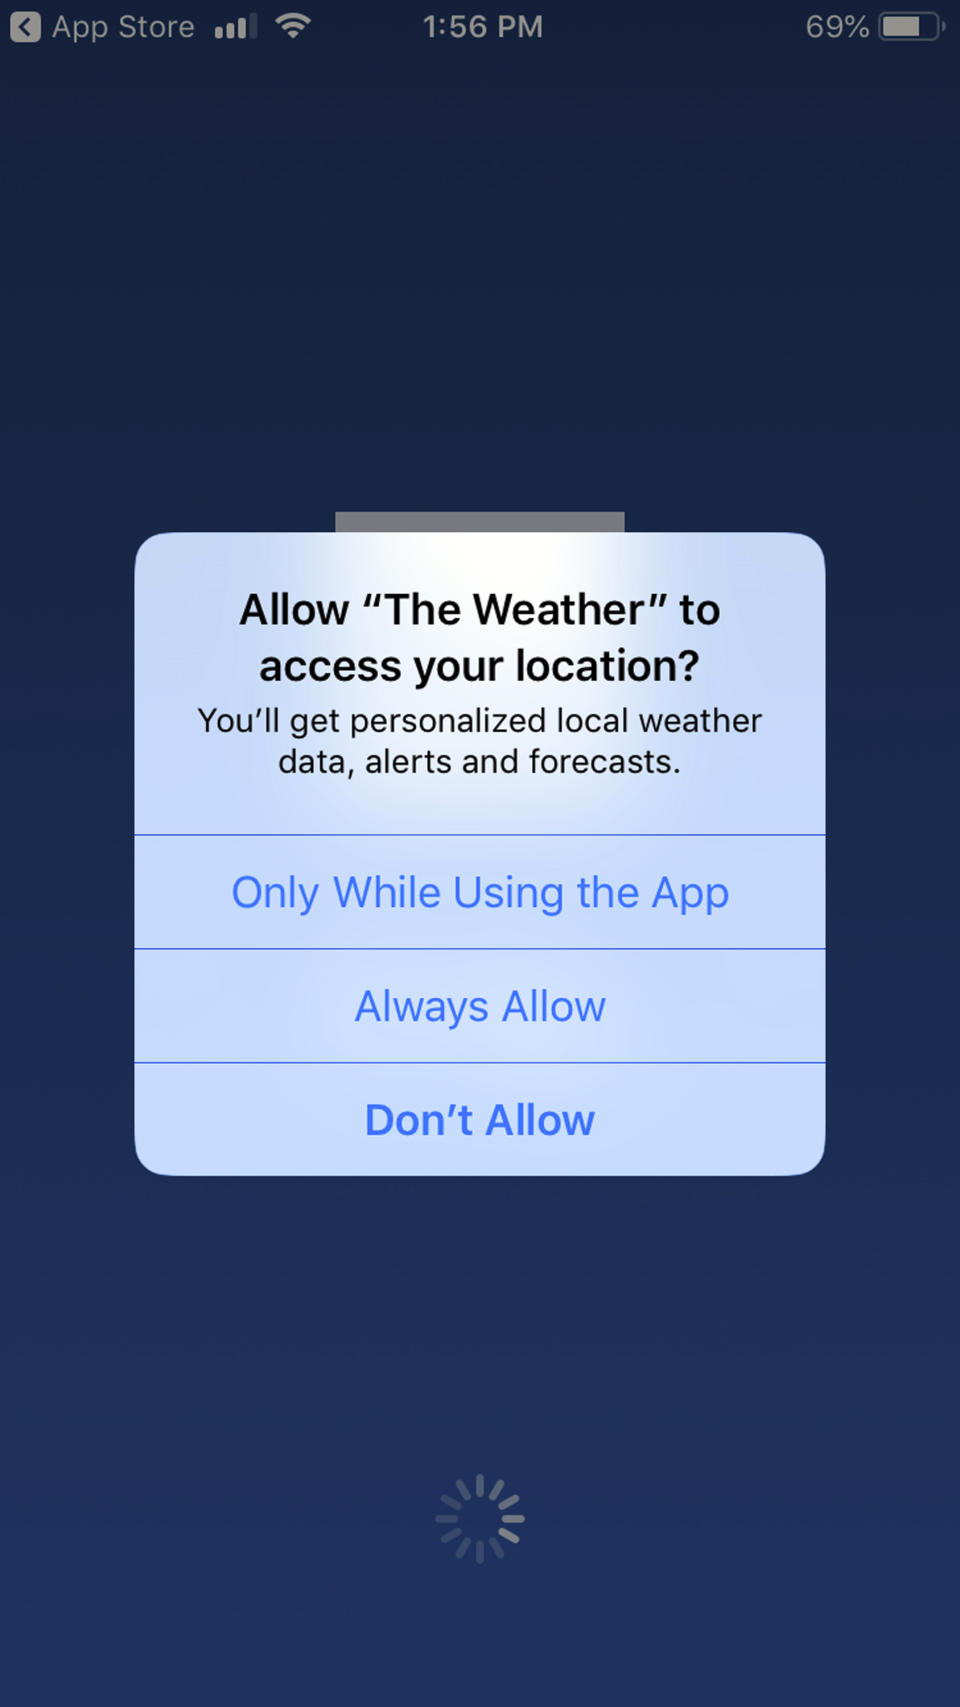 A mobile phone with The Weather Channel app location preference page is seen Friday, Jan. 4, 2019. Los Angeles City Attorney Michael Feuer said Friday that owners of The Weather Channel app, one of the most popular mobile weather apps, used it to track people's every step and profit off that information. Feuer said the company misled users of the popular app to think their location data will only be used for personalized forecasts and alerts. A spokesman for app owner IBM Corp. says it's been clear about the use of location data and will vigorously defend its "fully appropriate" disclosures. (AP Photo/Brian Melley)